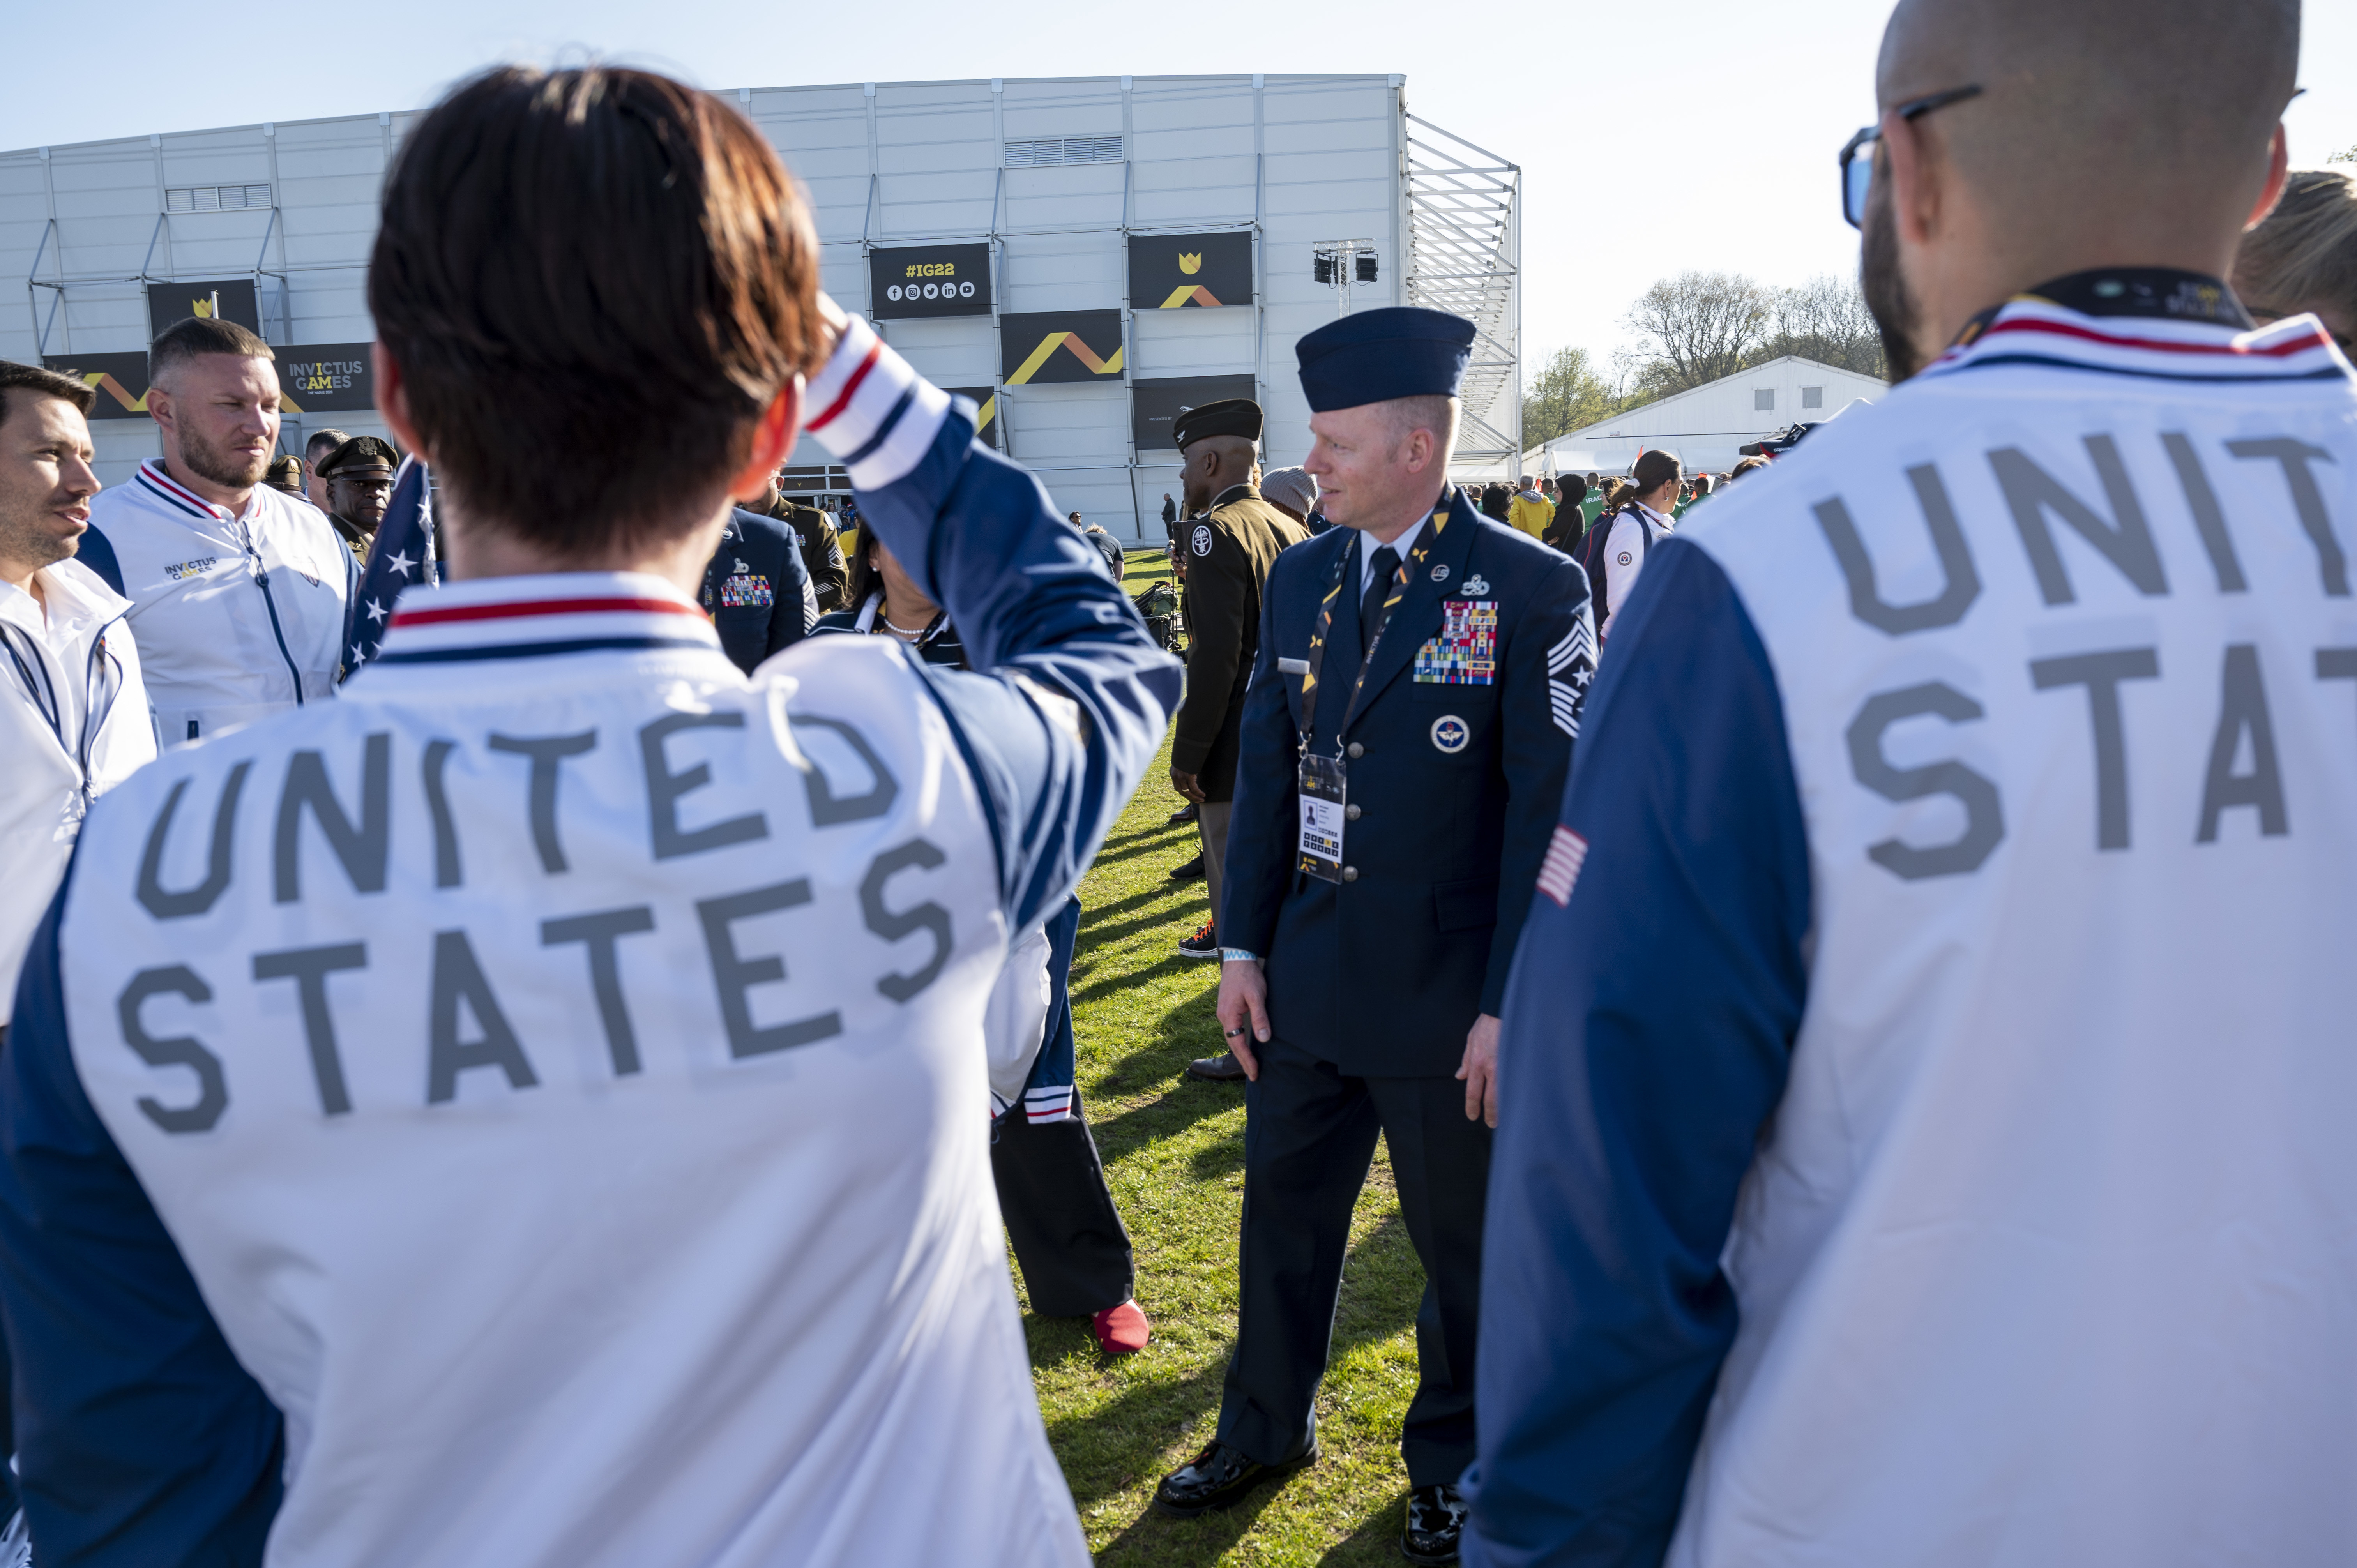 Invictus Games Athlete Continues Family Military Tradition > U.S.